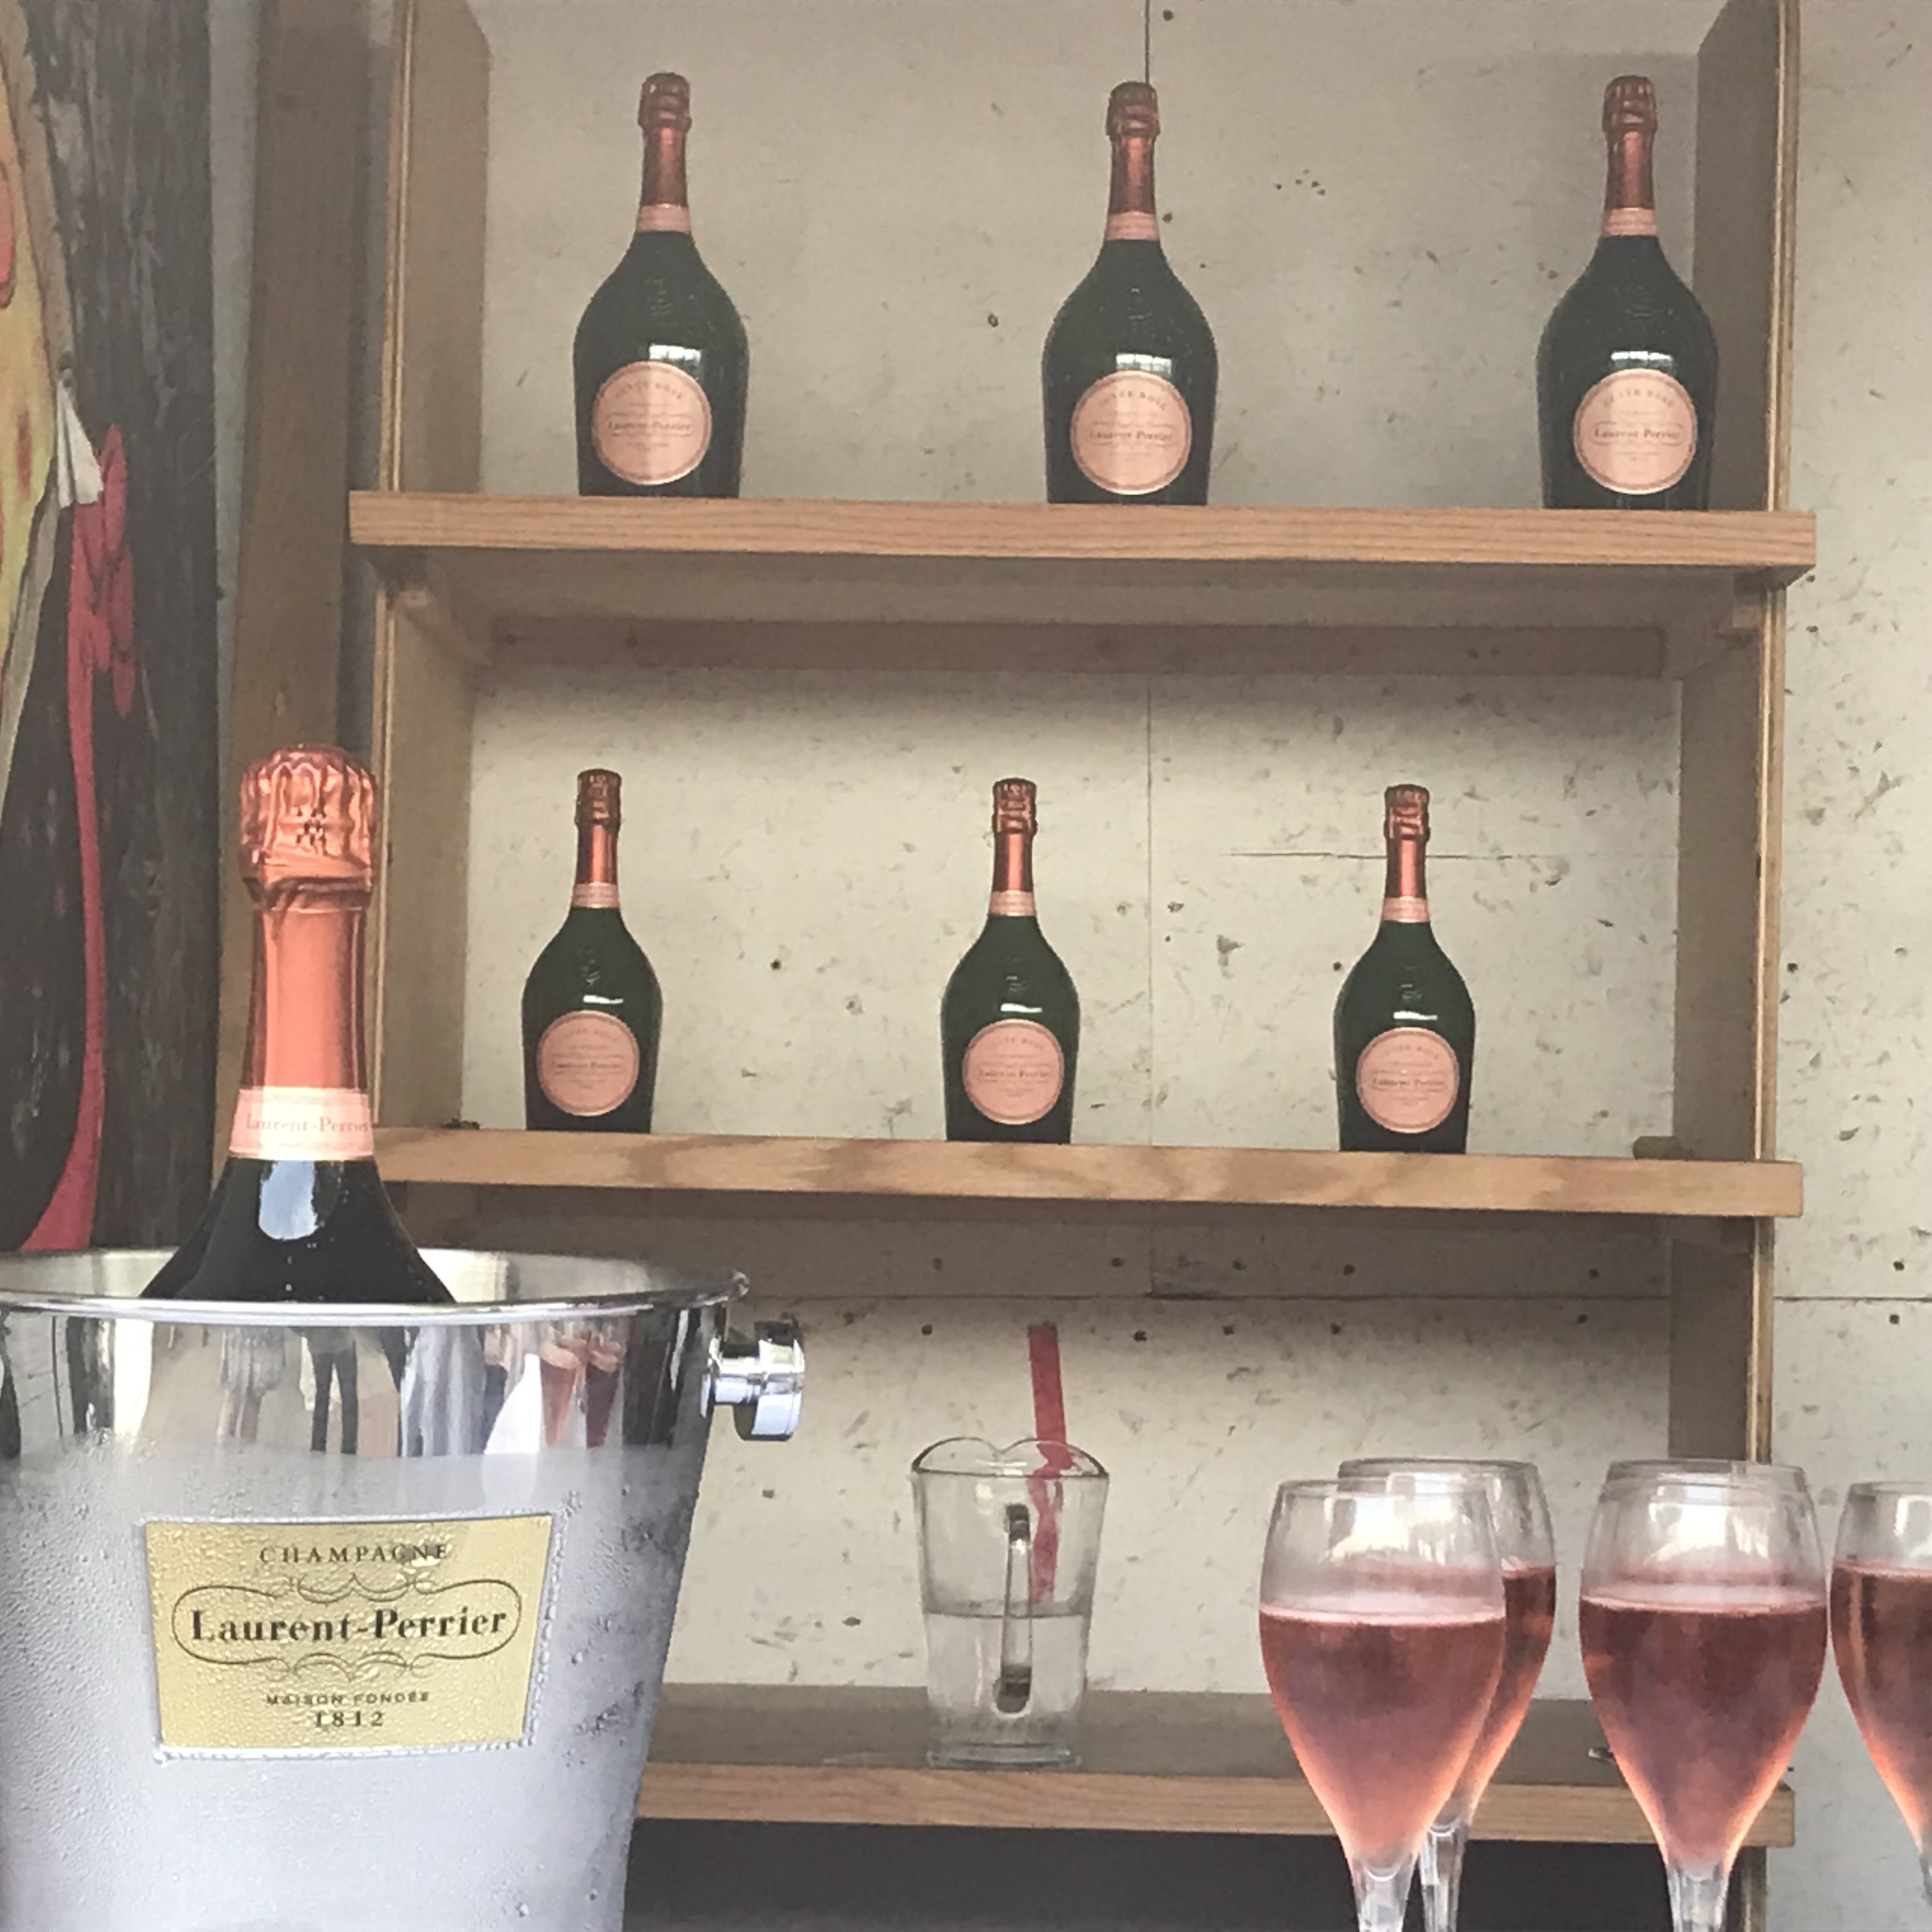 50 Years of Champagne Laurent-Perrier Cuvée Rosé at Roberta's